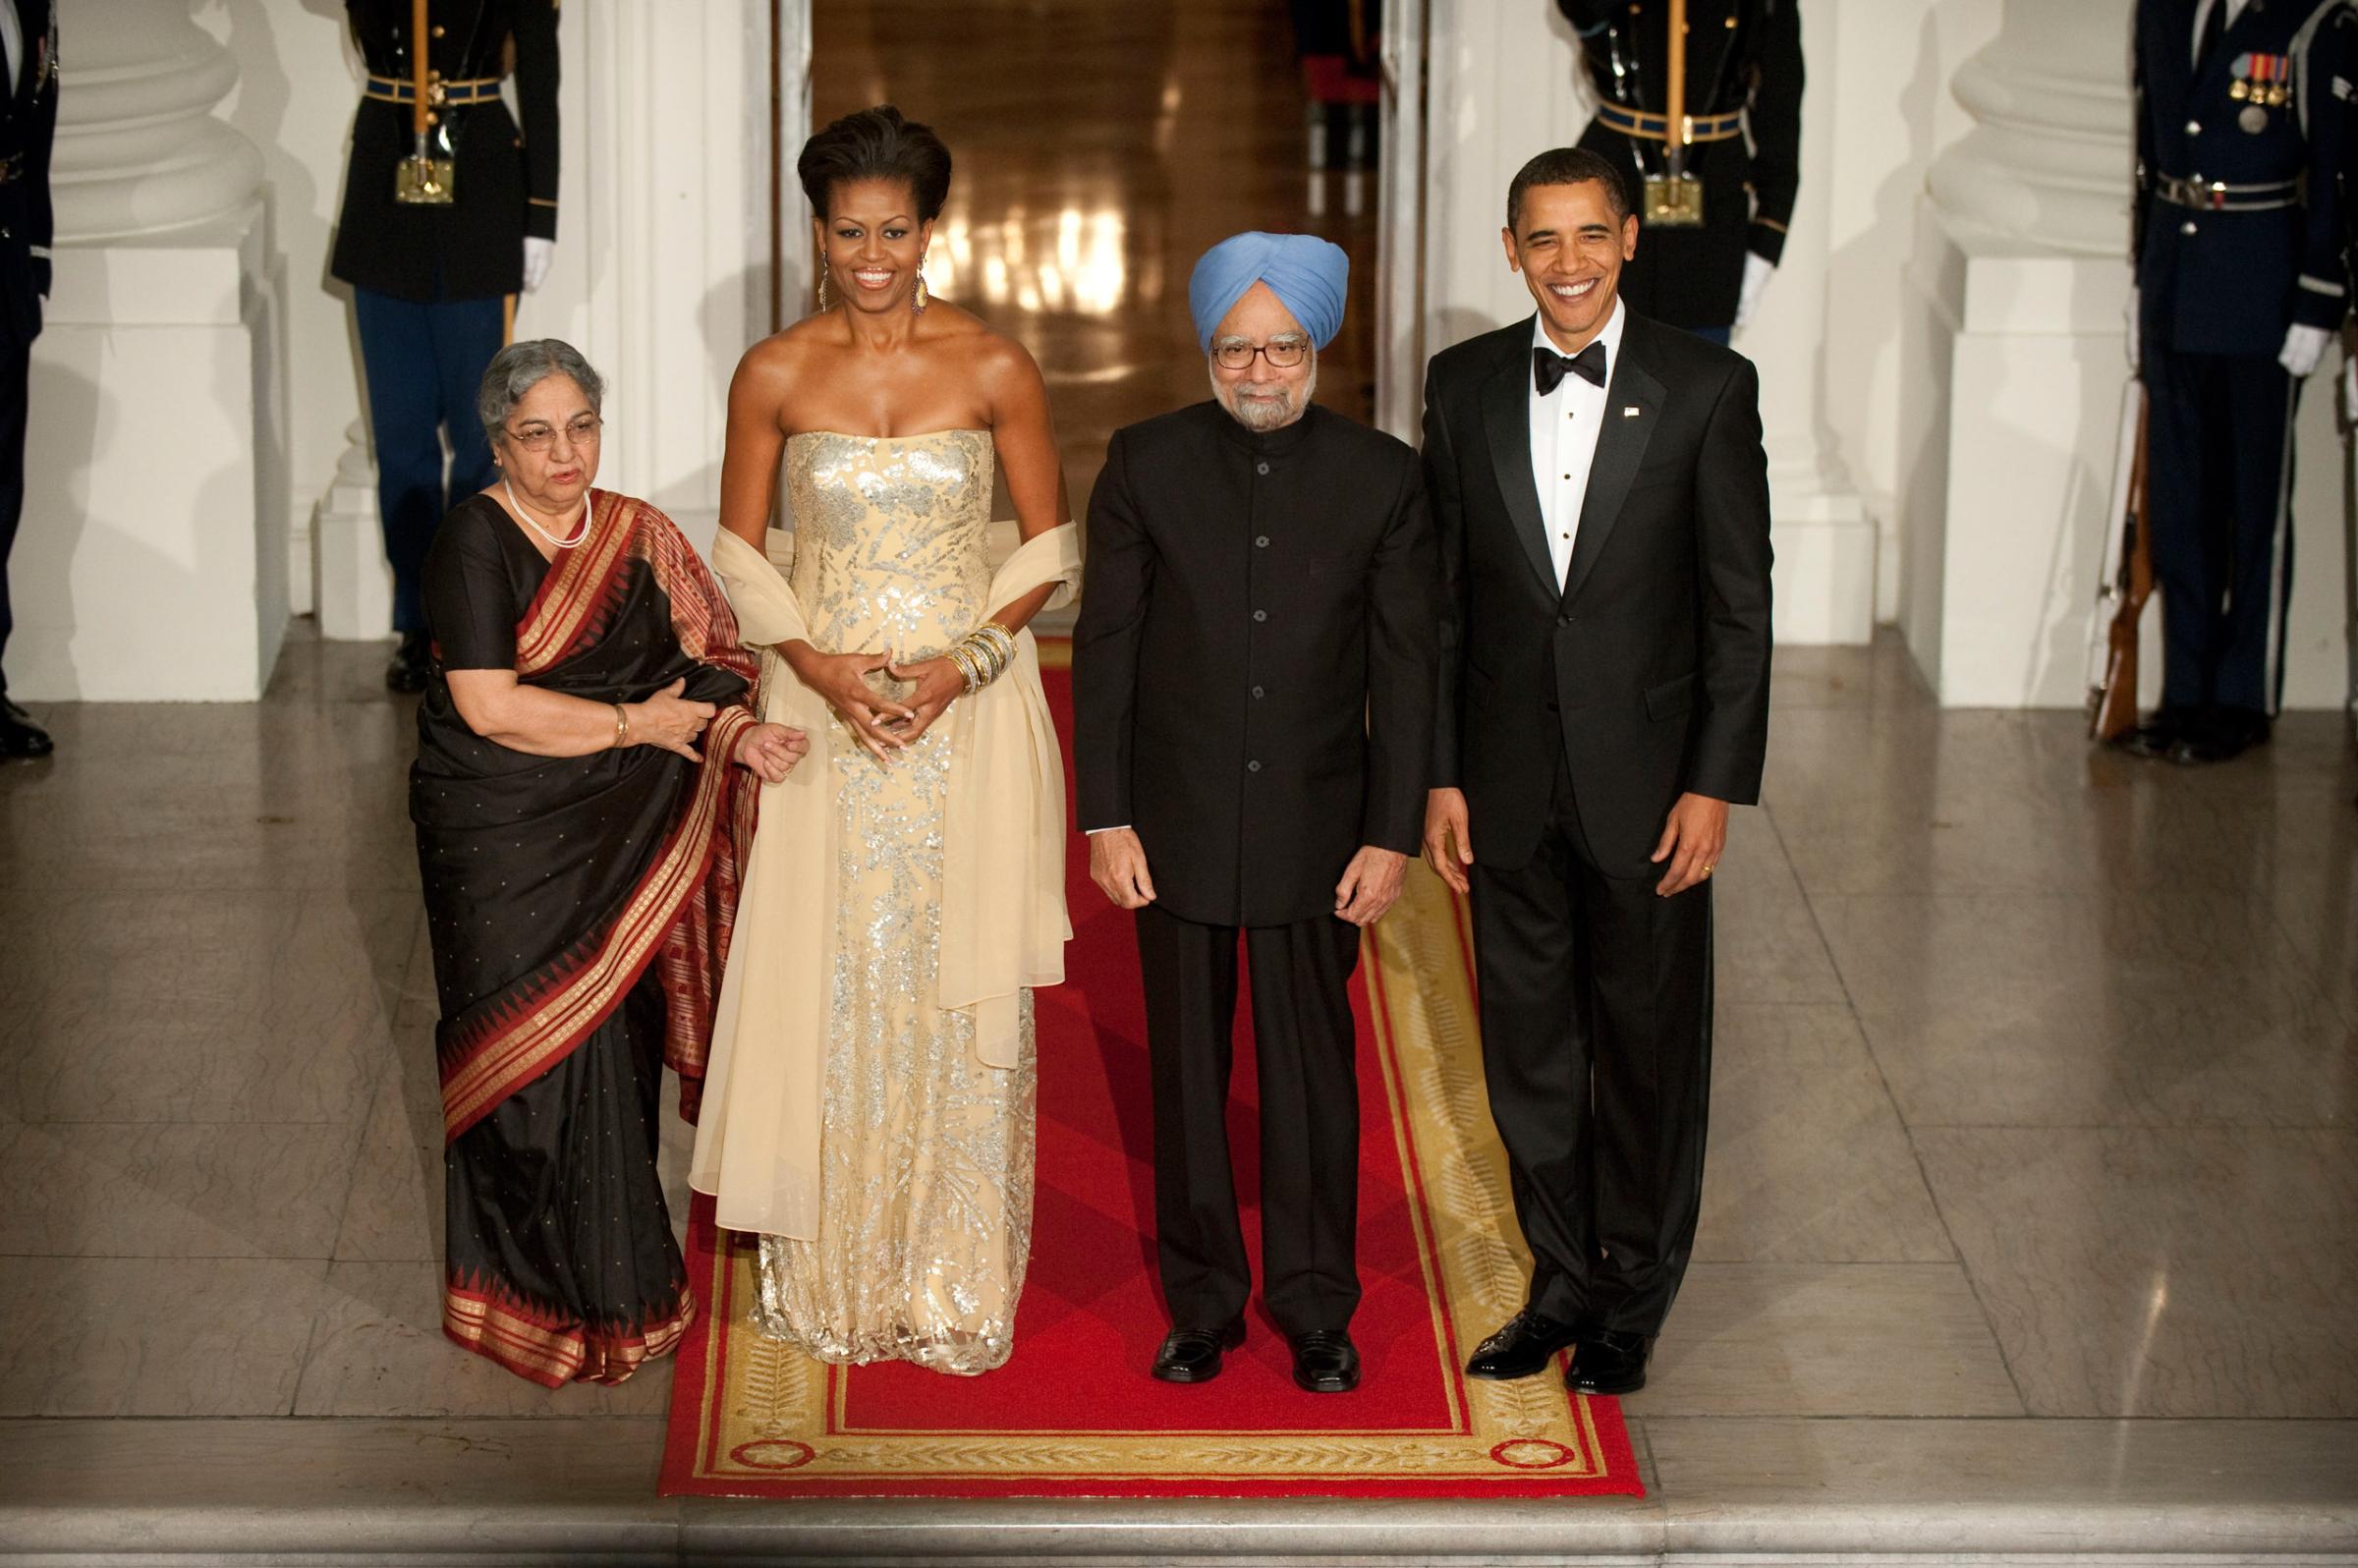 President Barack Obama and the The First Lady Michelle Obama welcomes Prime Minister Dr. Manmohan Singh and Mrs. Gursharan Kaur to the first White House State Dinner.